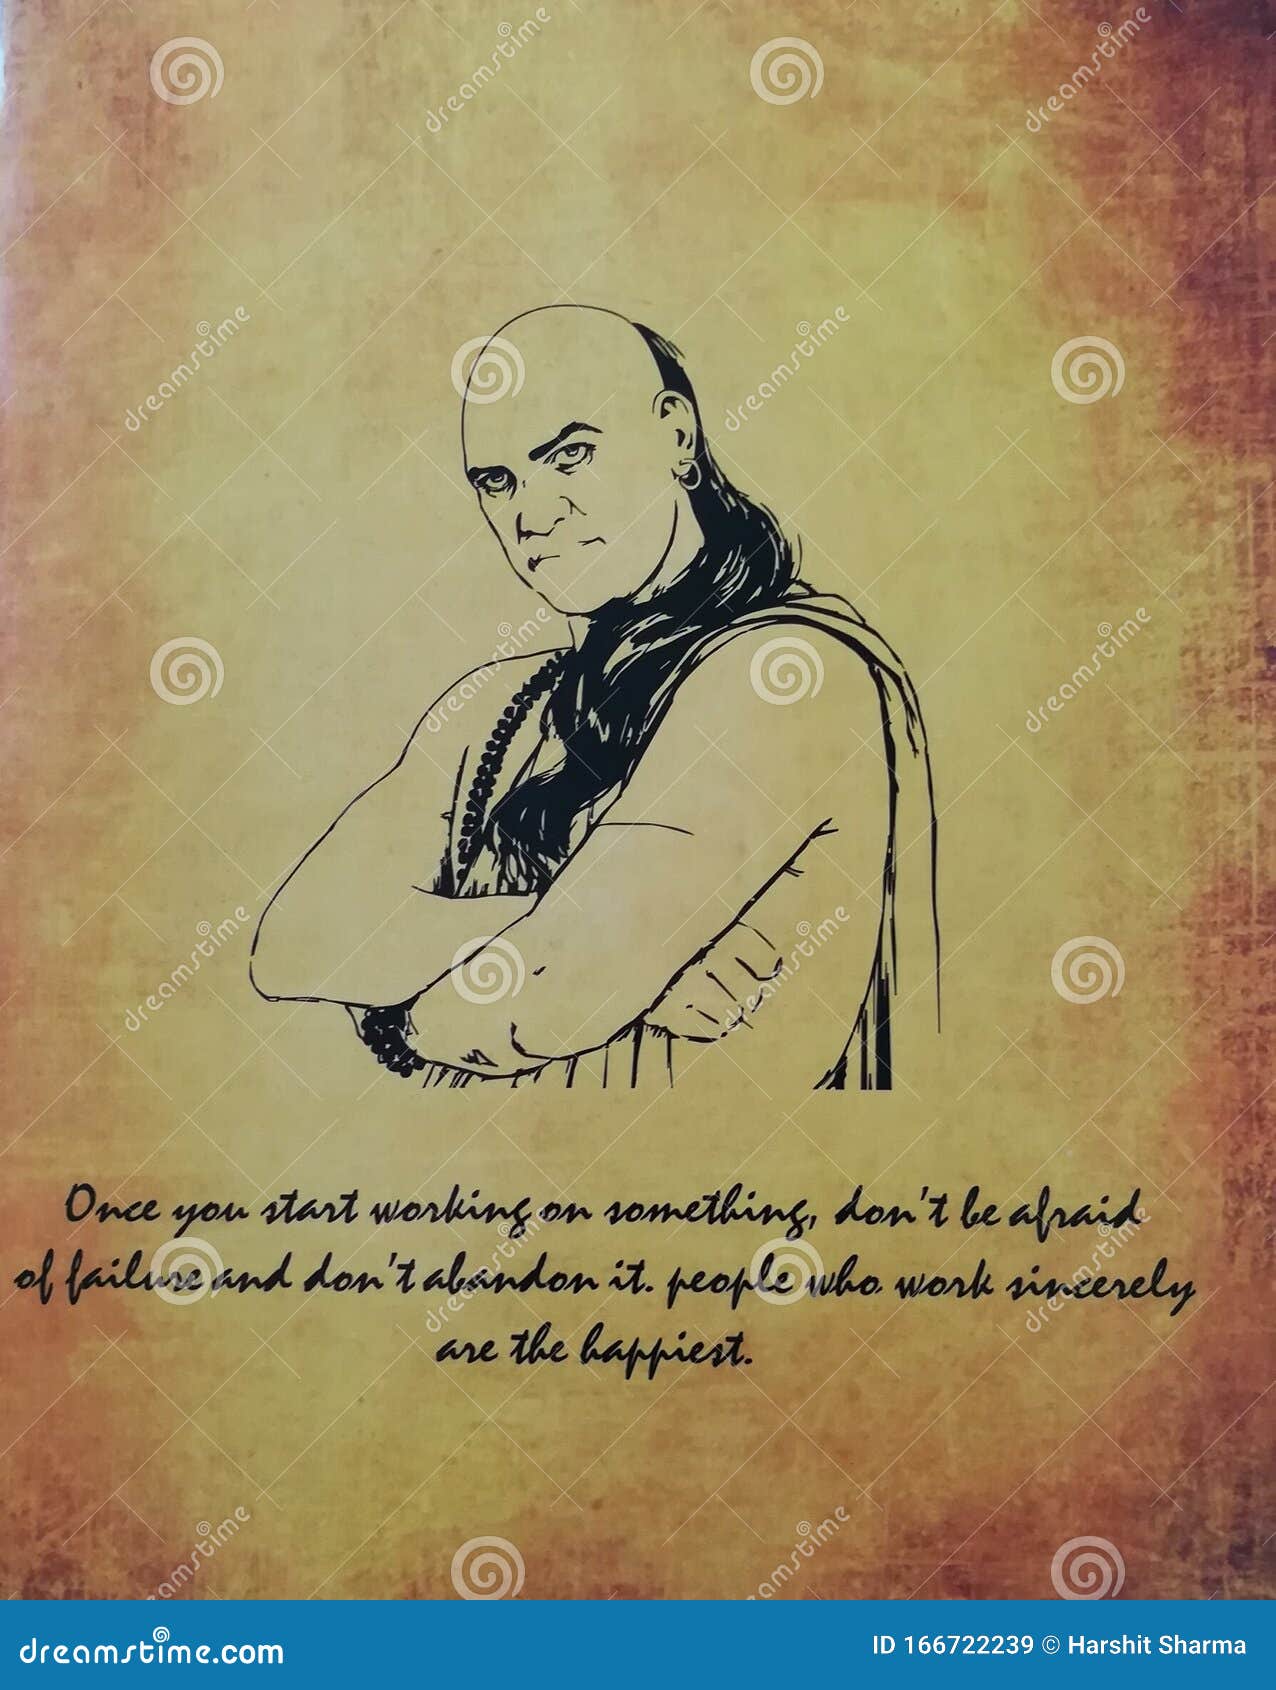 chanakya quotes images चणकय कटस photos whatsapp status wallpaper   Chanakya quotes Image quotes Life quotes pictures